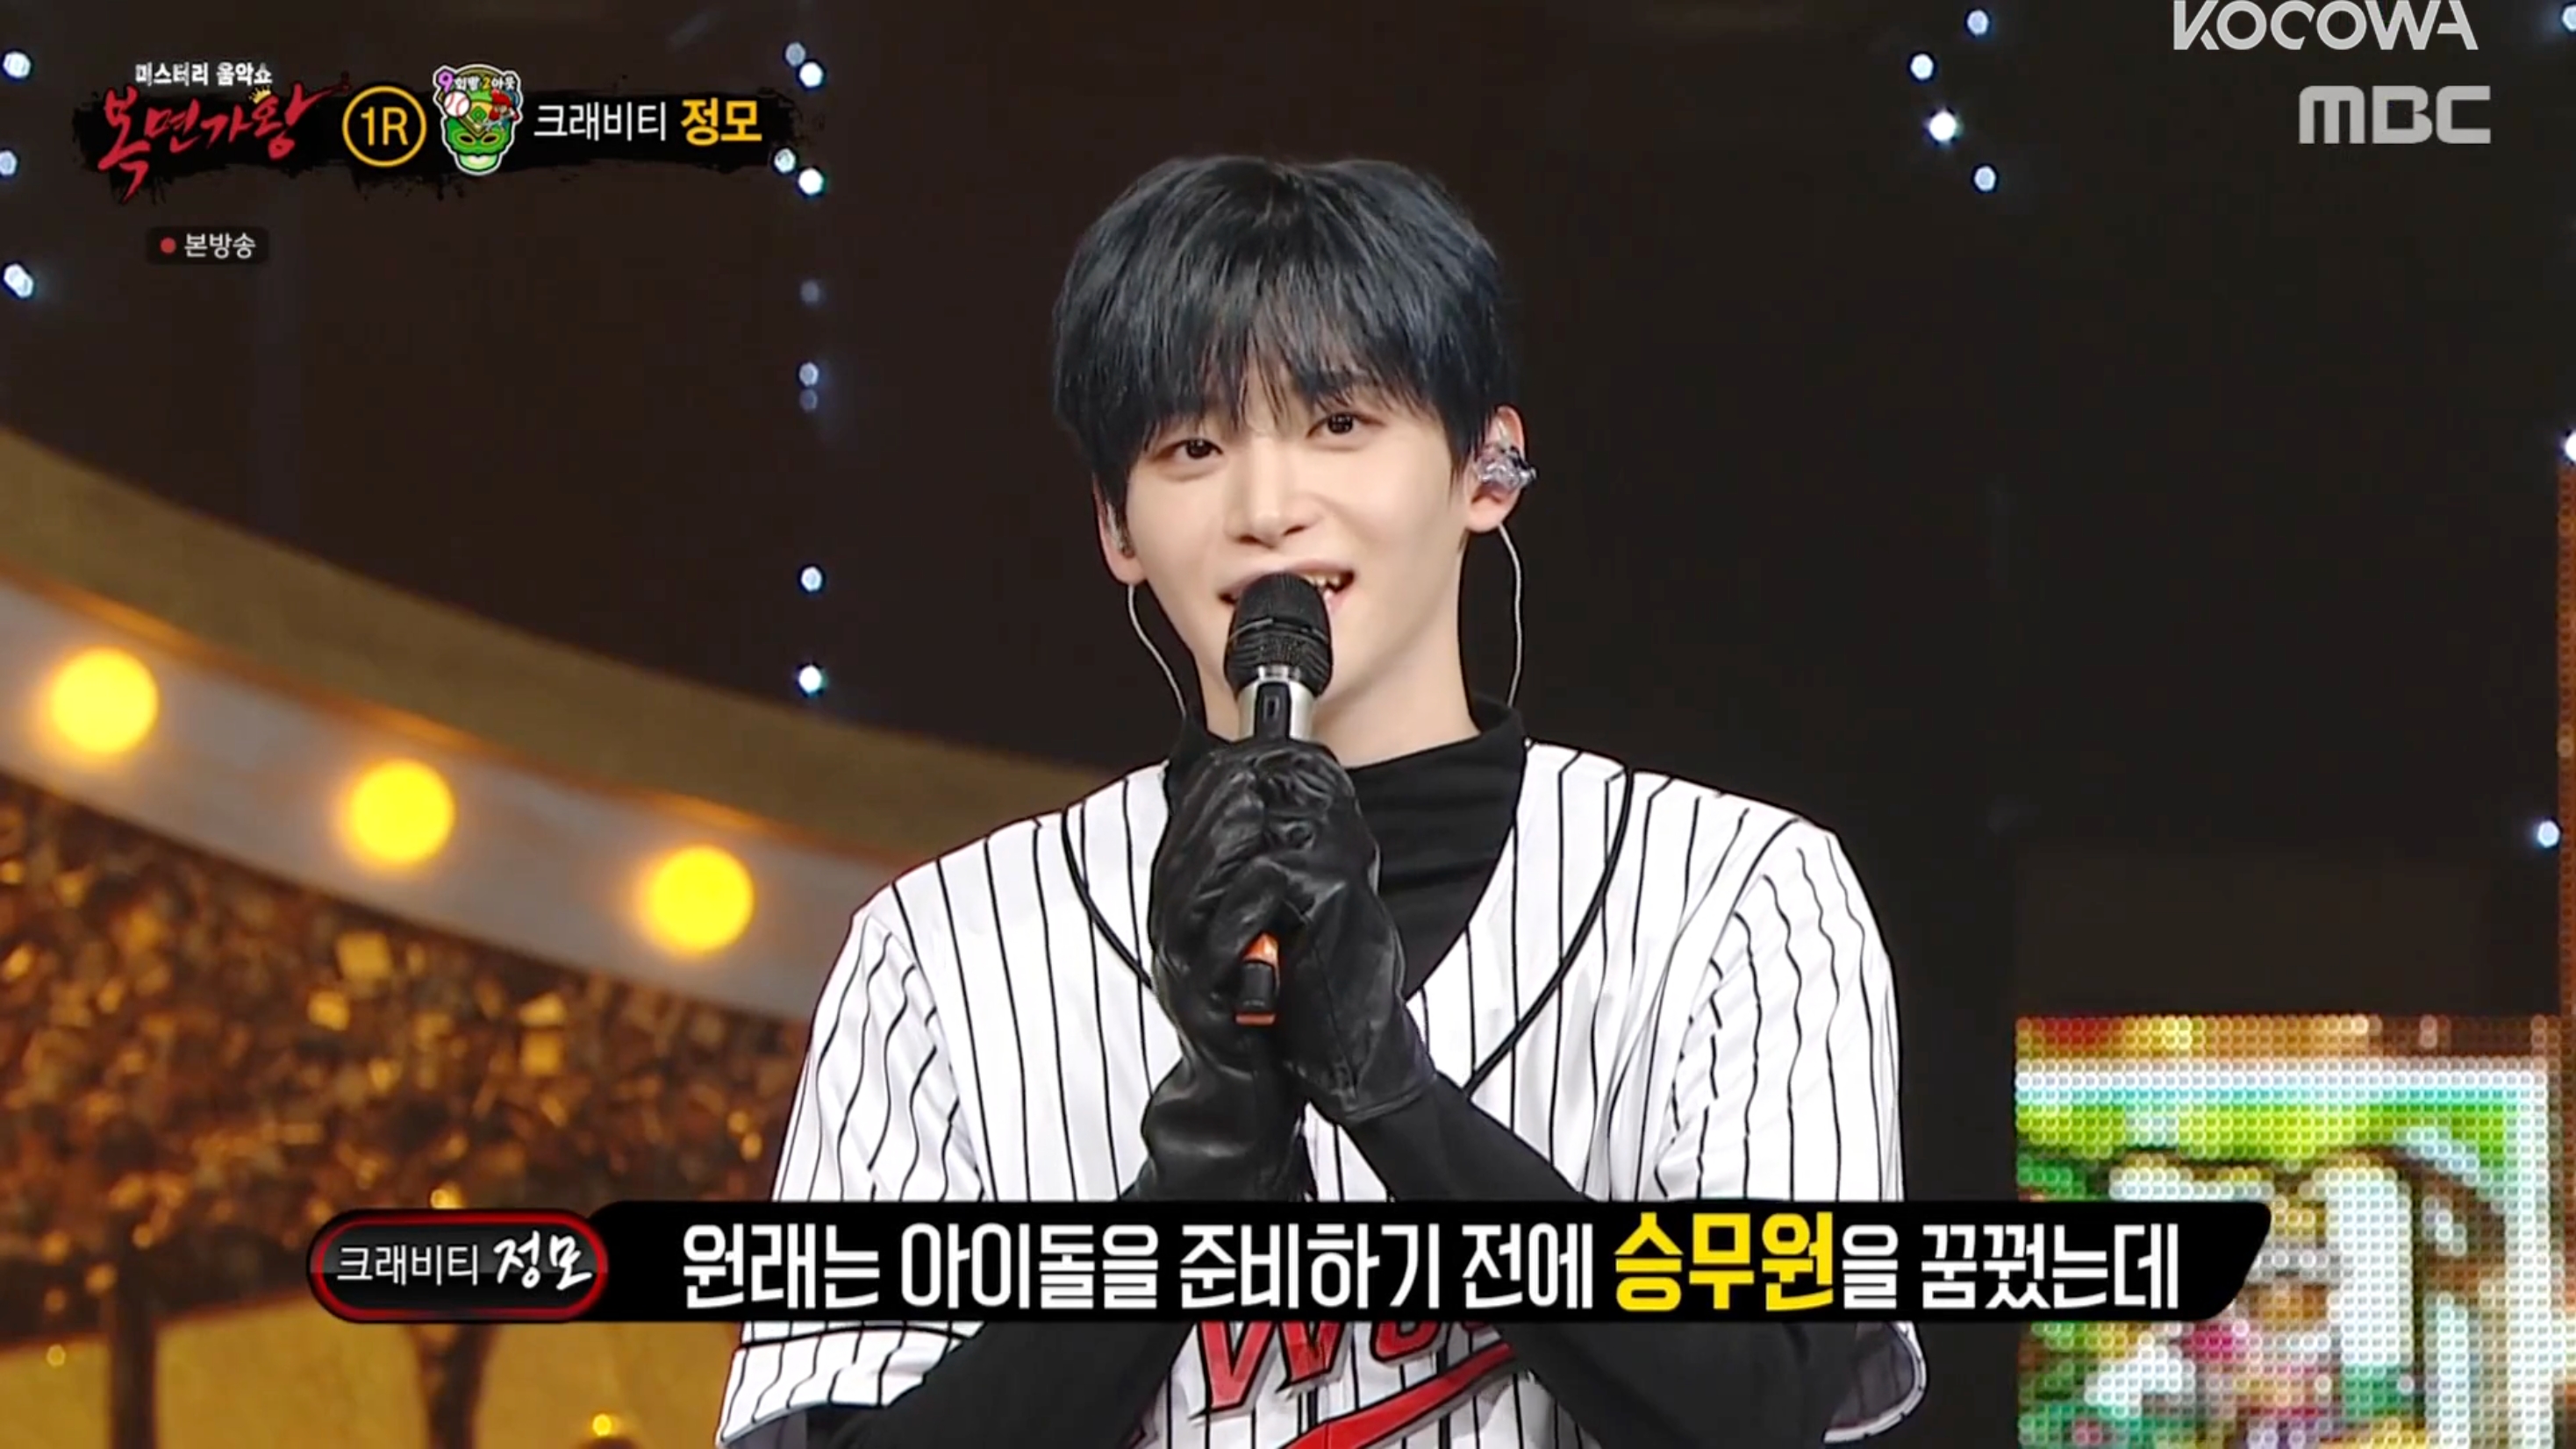 Watch: Boy Group Member Is Immediately Recognized By Fellow Survival Show Contestant On 